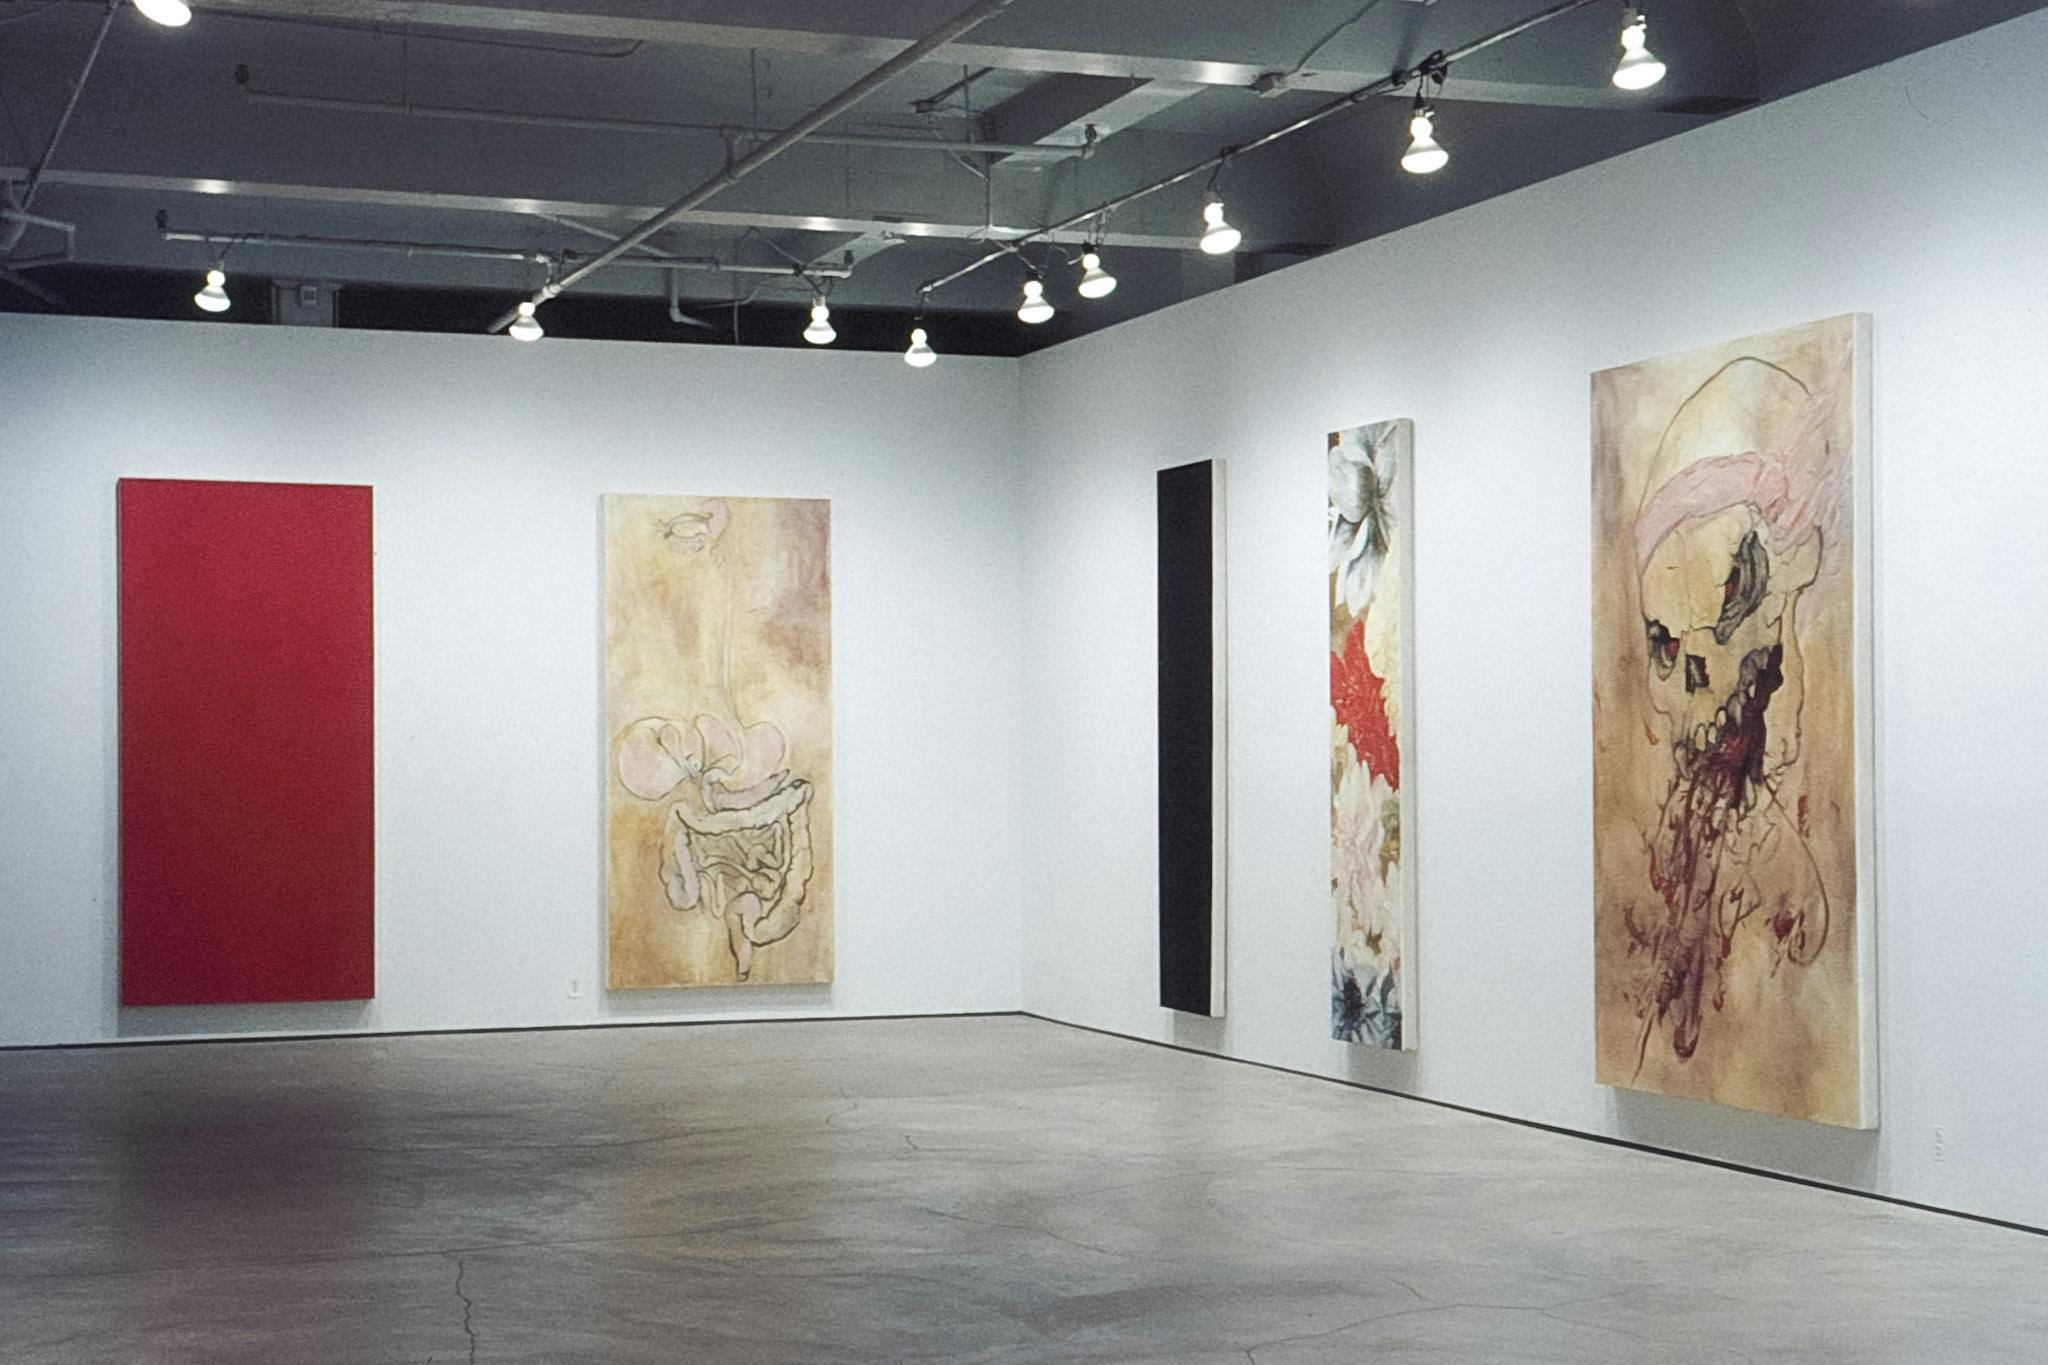 Five vertical paintings in the corner of a gallery. The paintings depict various things, including a human digestive system, flowers, and a skull. One painting is all red, and one is all black.